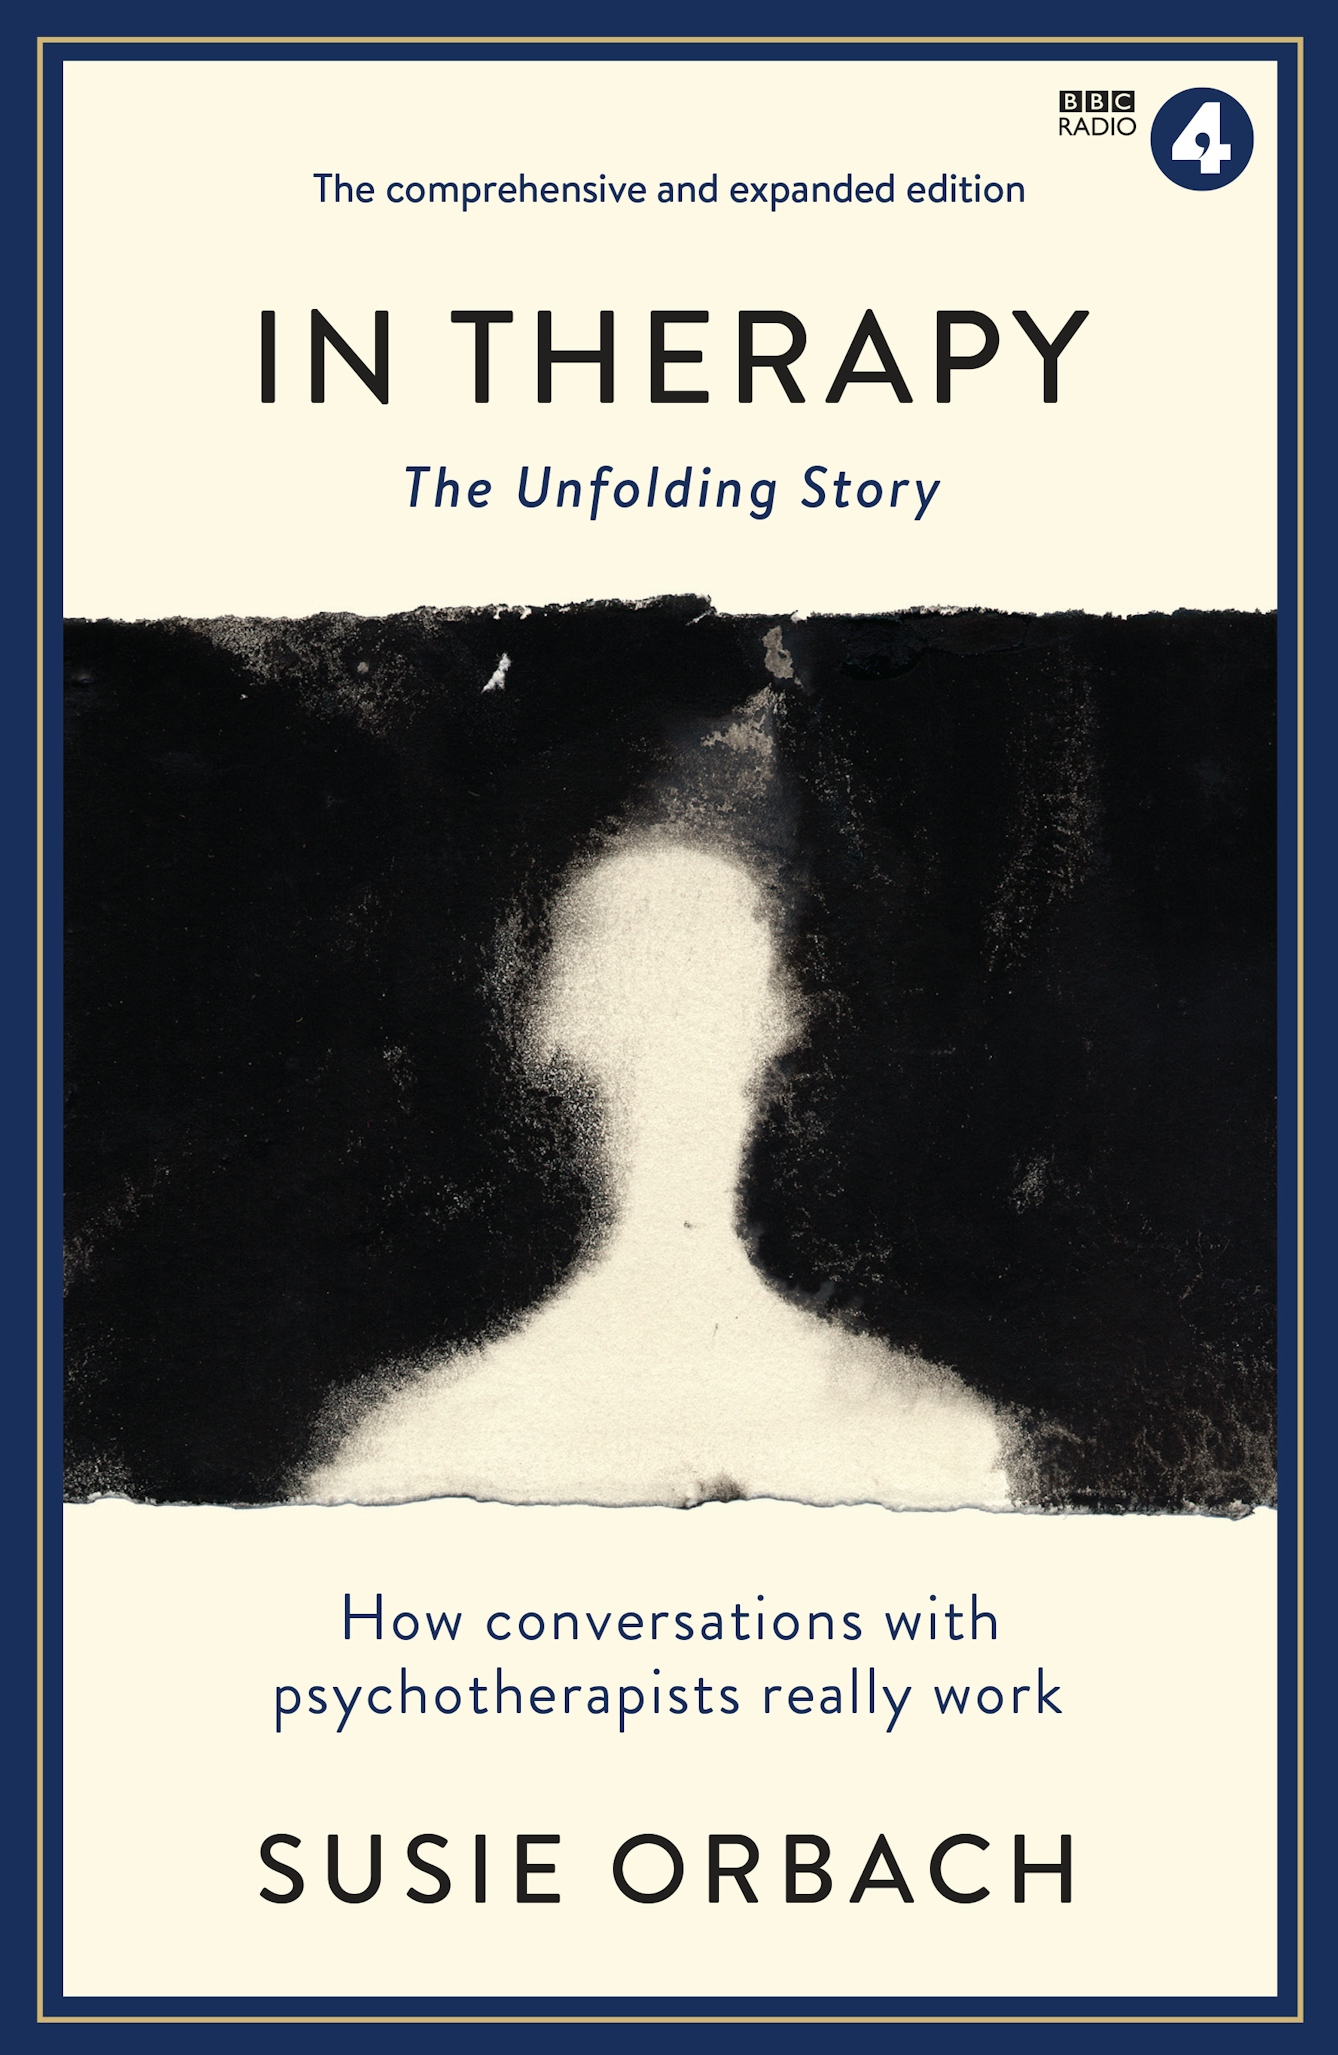 Front cover of the book 'In Therapy, The Unfolding Story' by Susie Orbach.